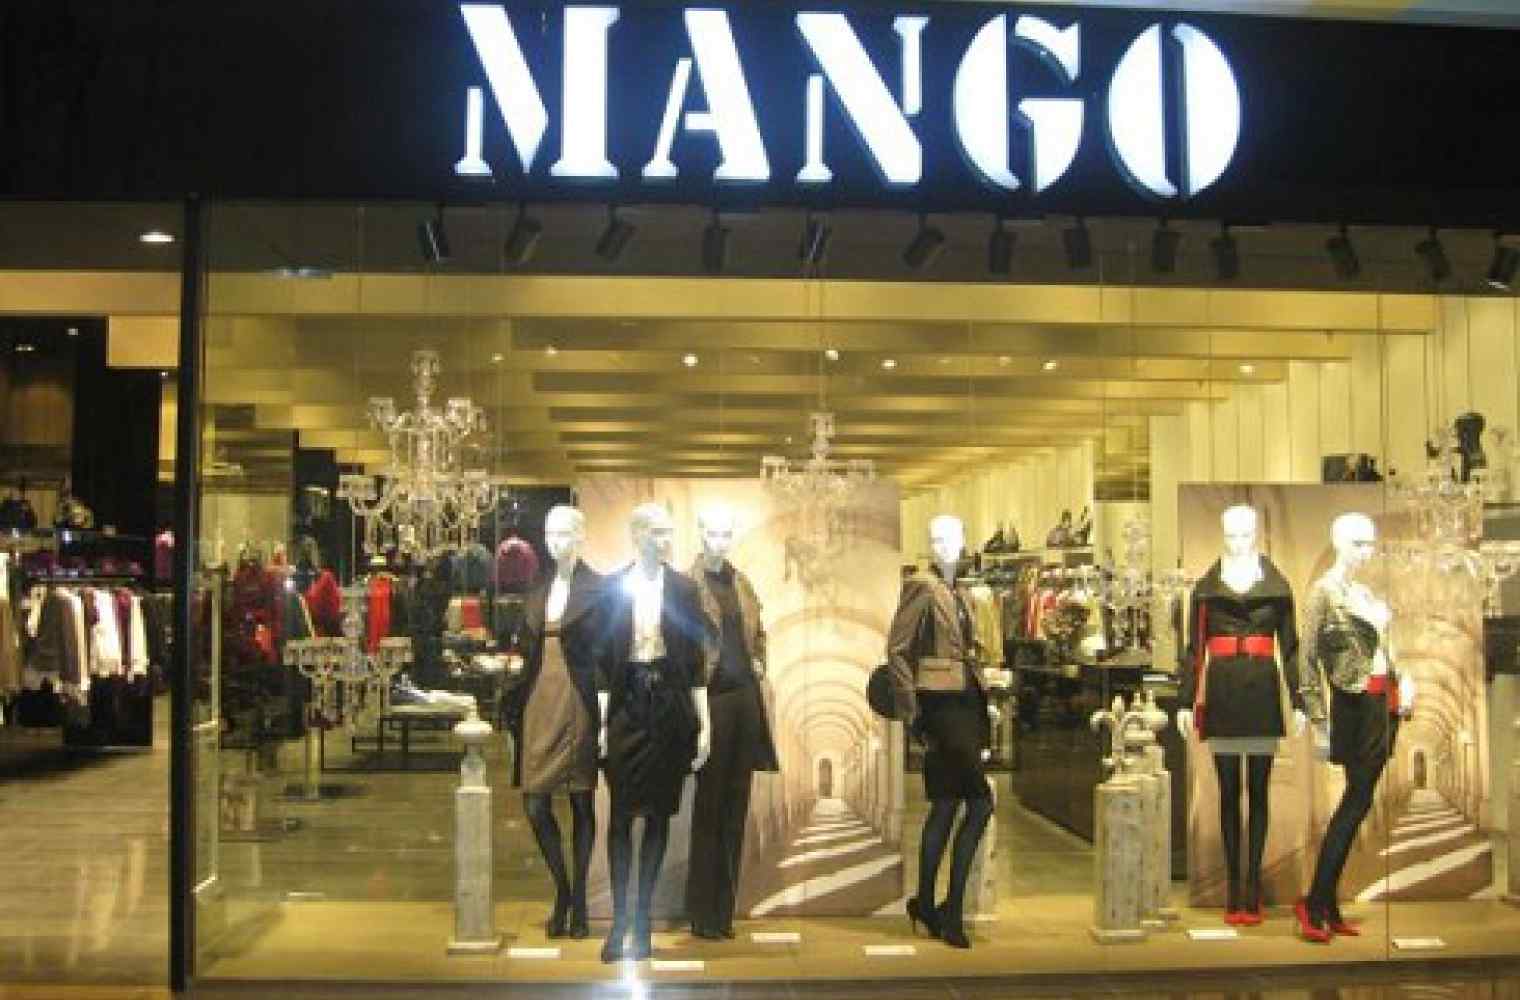 Mango will be represented in Shopping and entertainment center Respublika in absolutely new, unique format